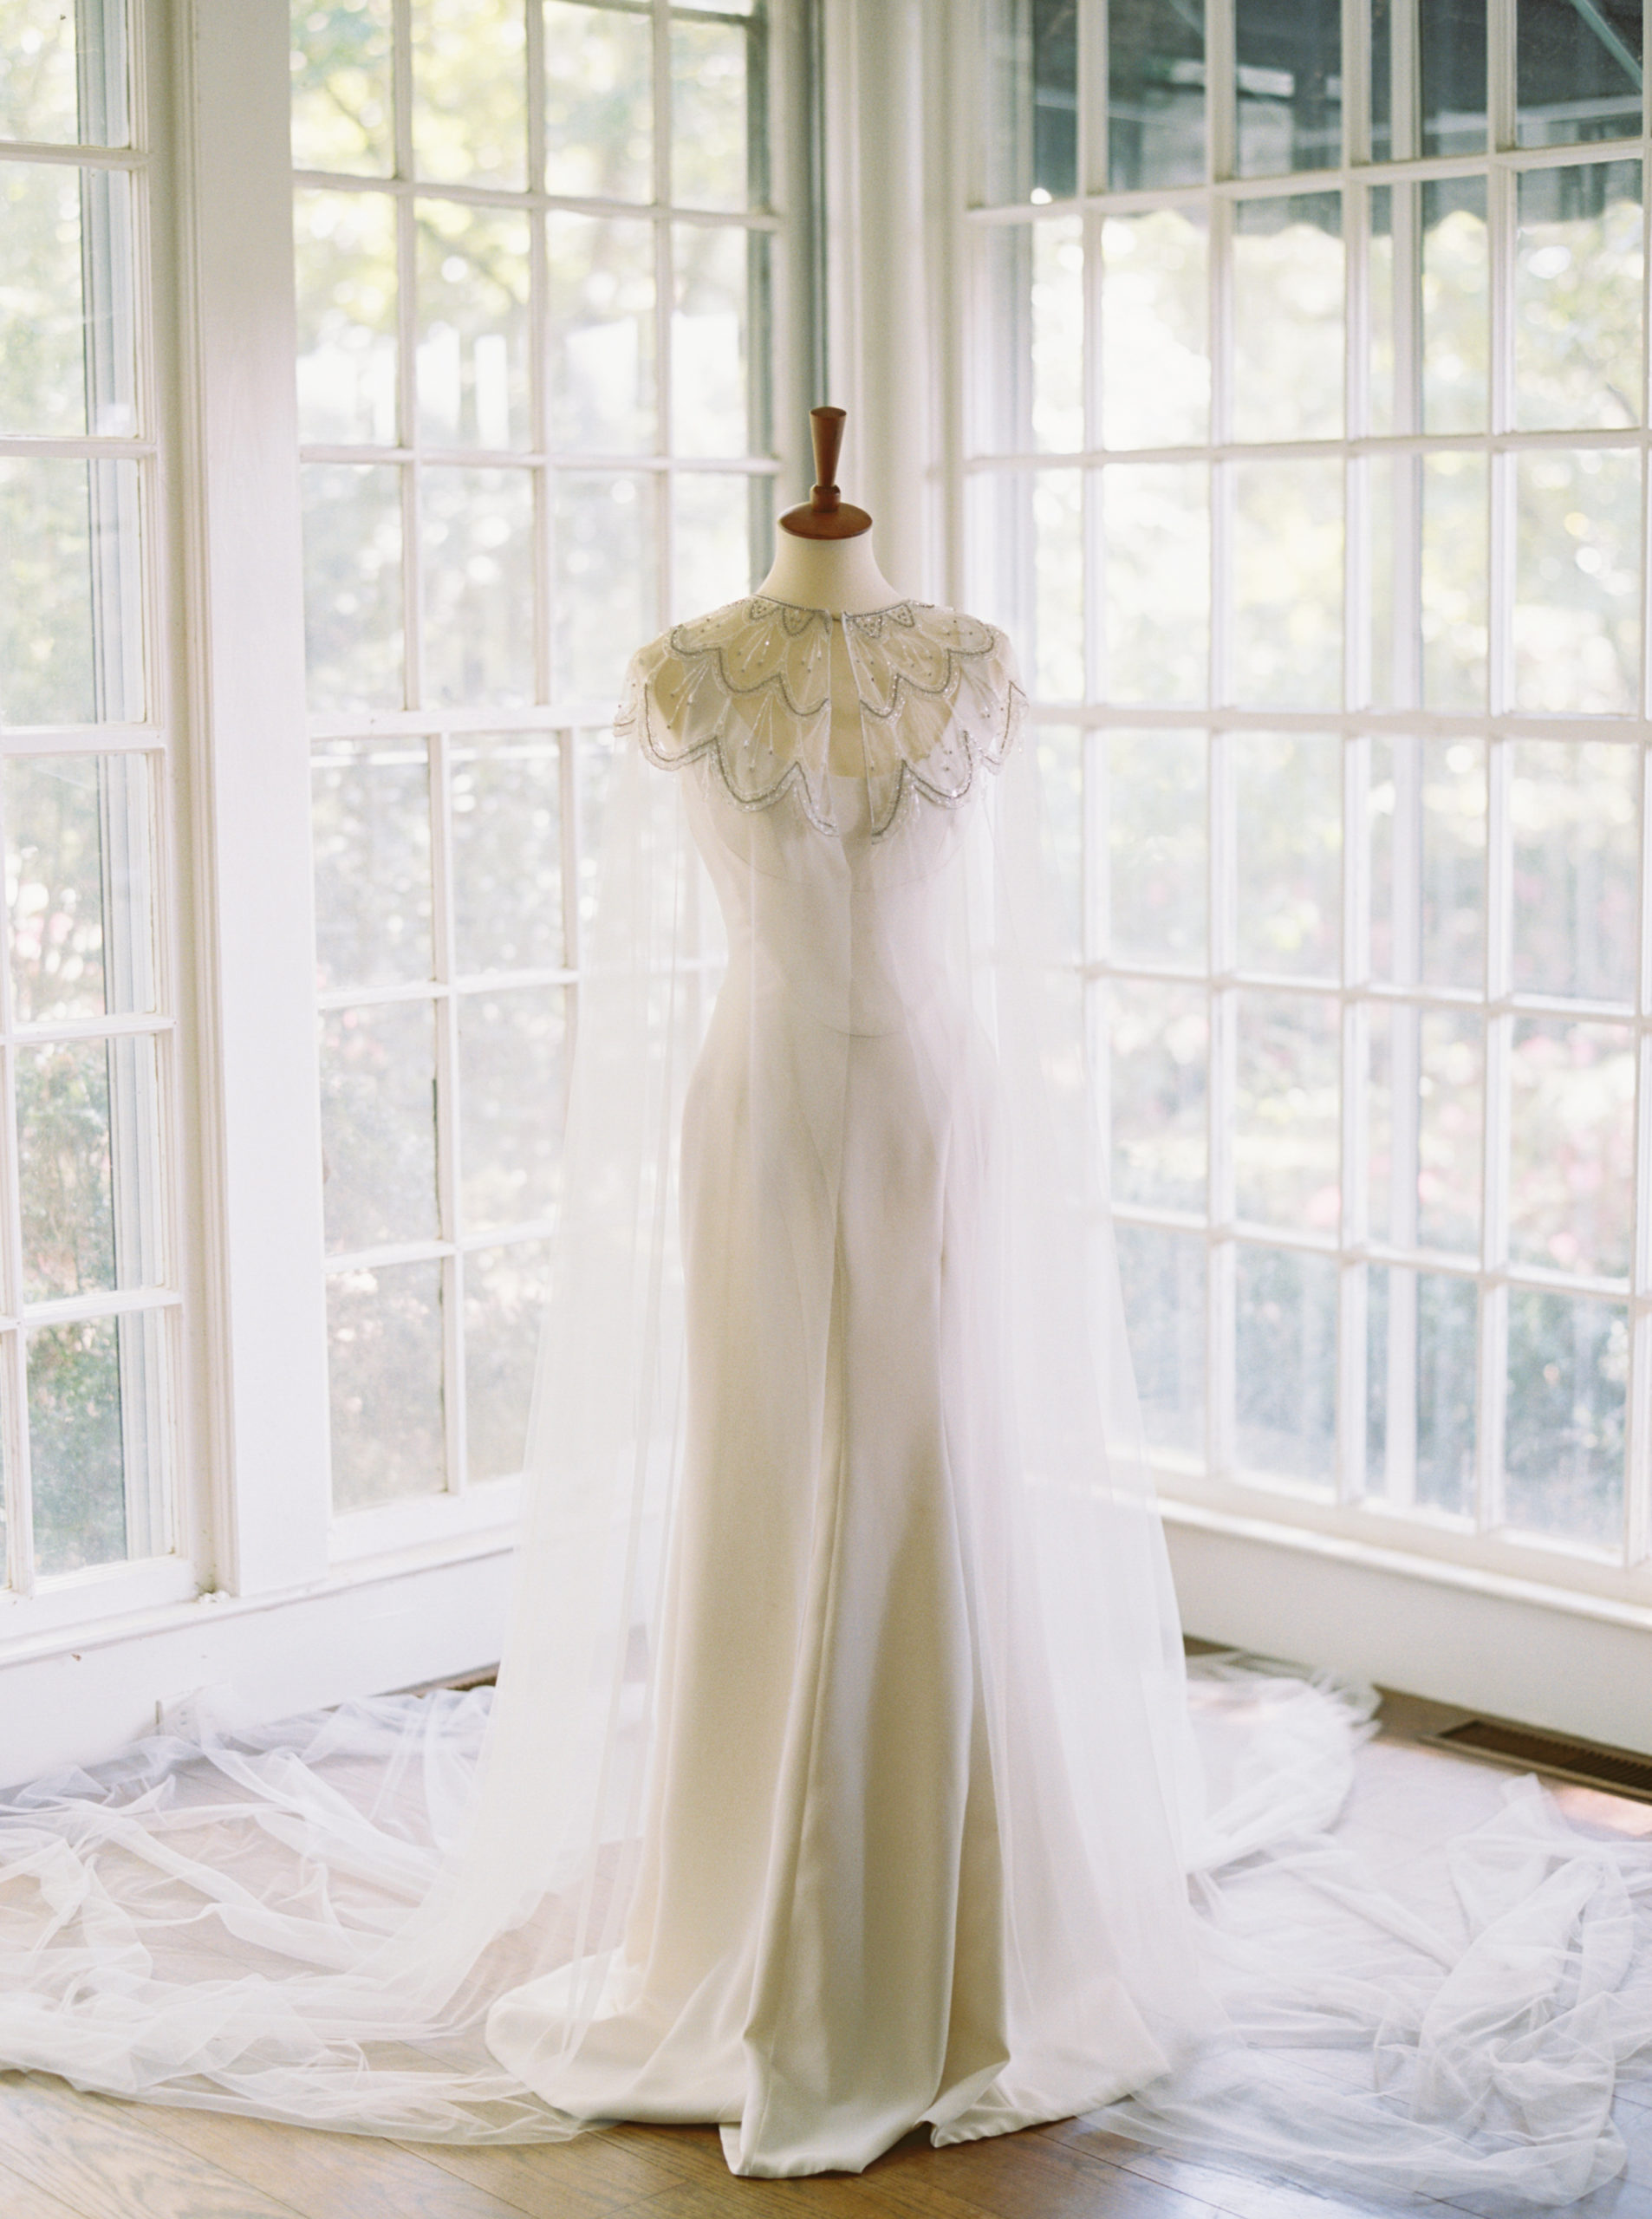 modern timeless wedding gown with veil cape at Meadowlark 1939 intimate wedding venue in Atlanta, Georgia shot by film wedding photographer Abigail Lewis Photography 